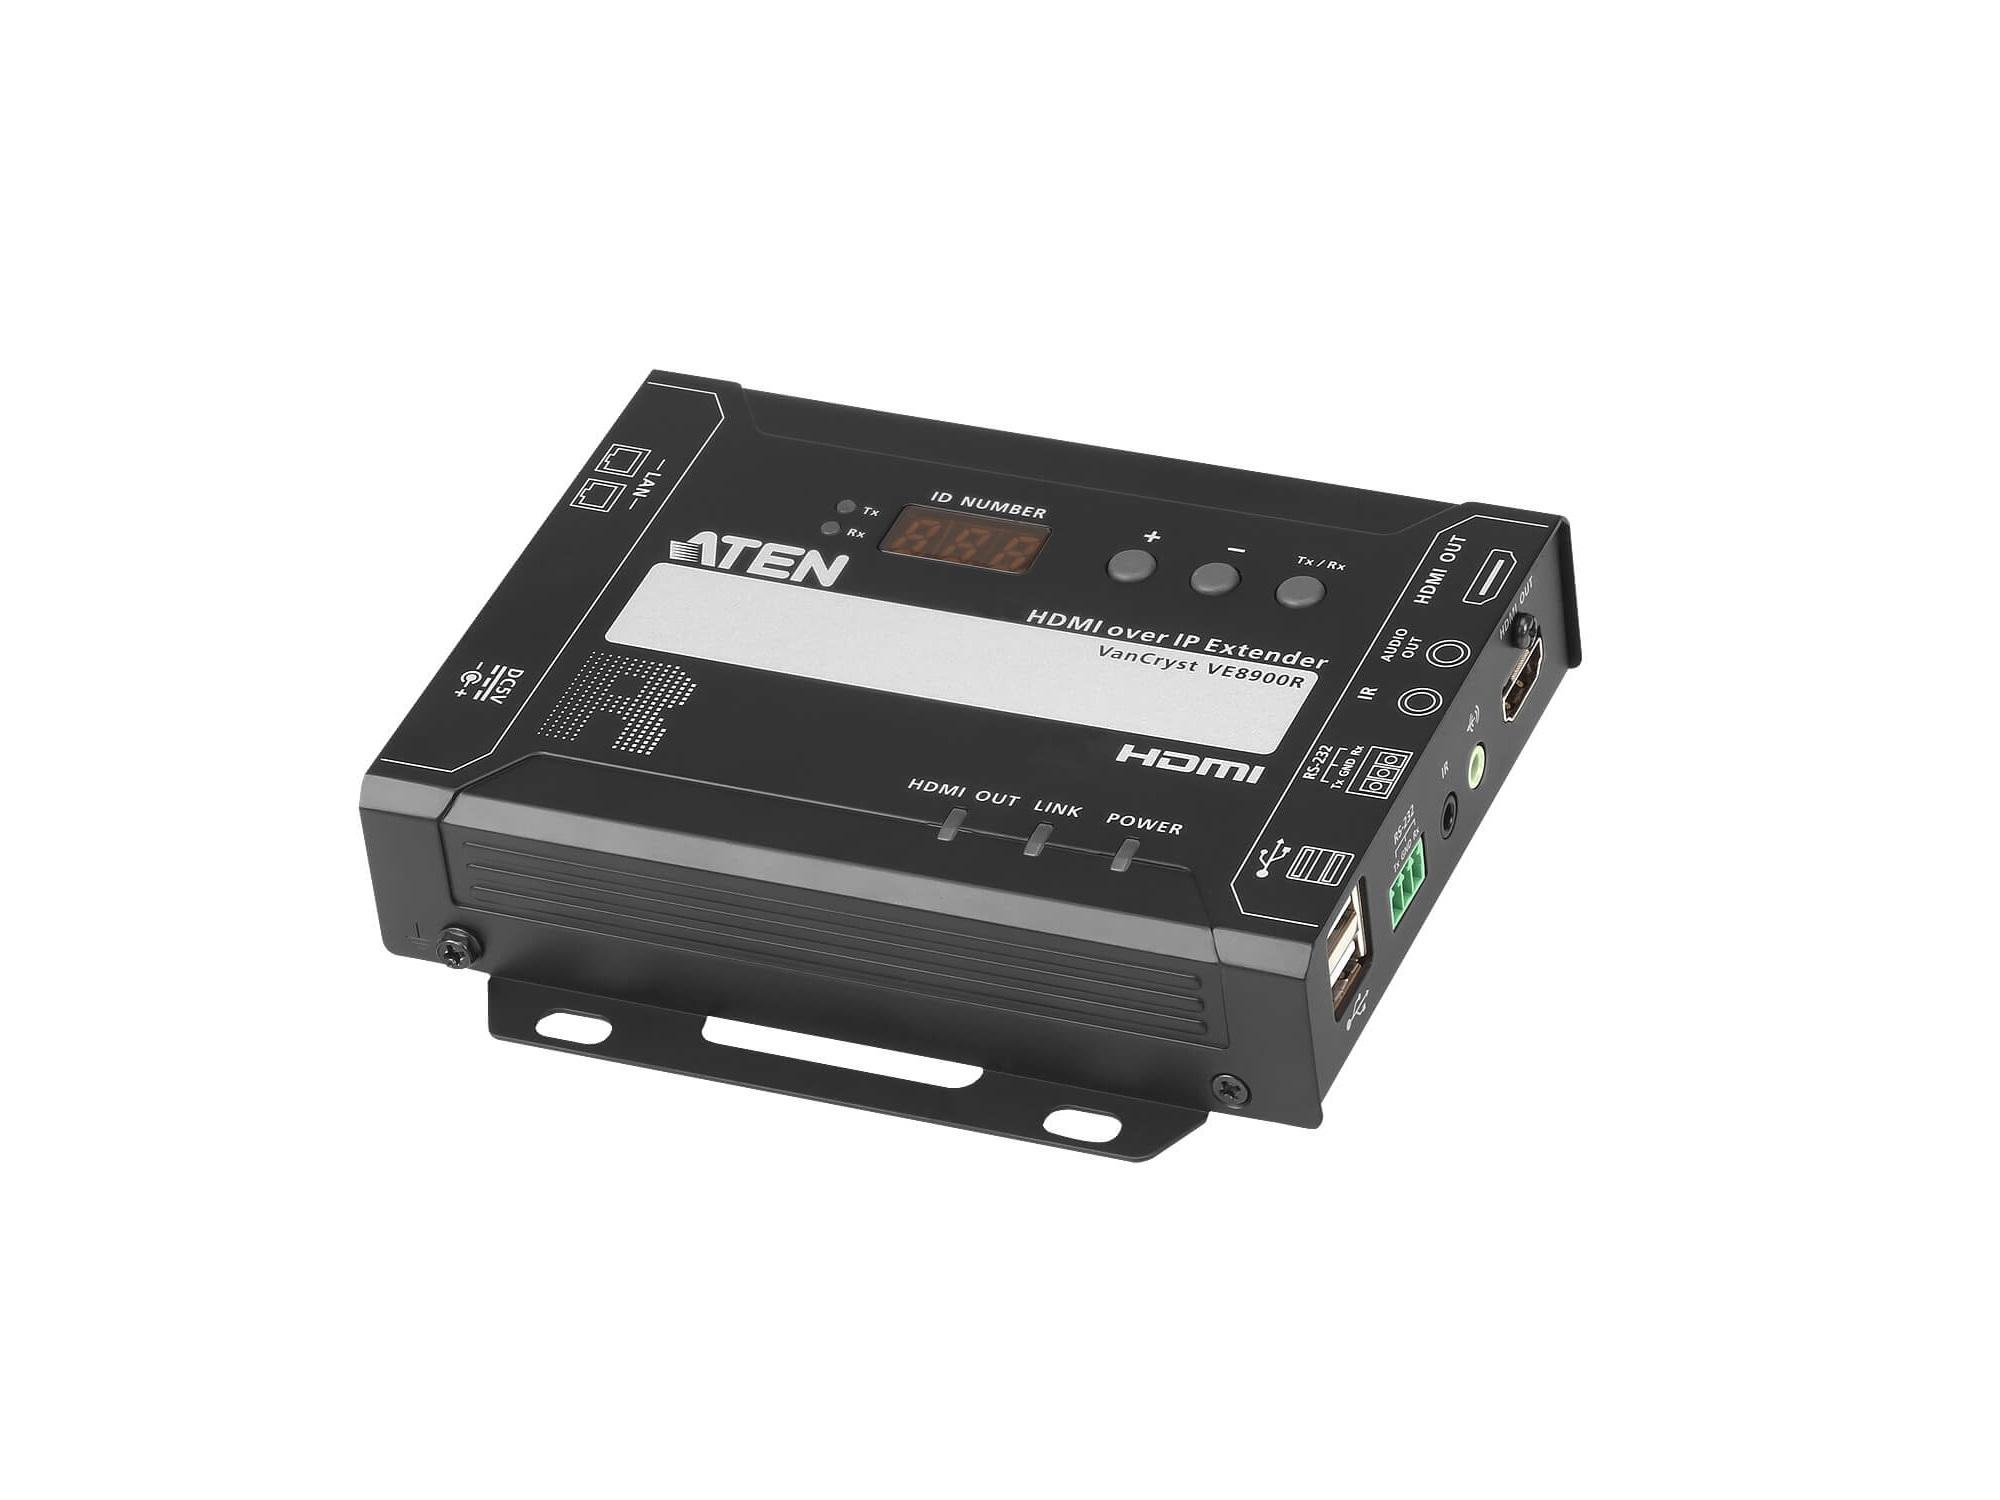 VE8900R HDMI over IP Receiver by Aten